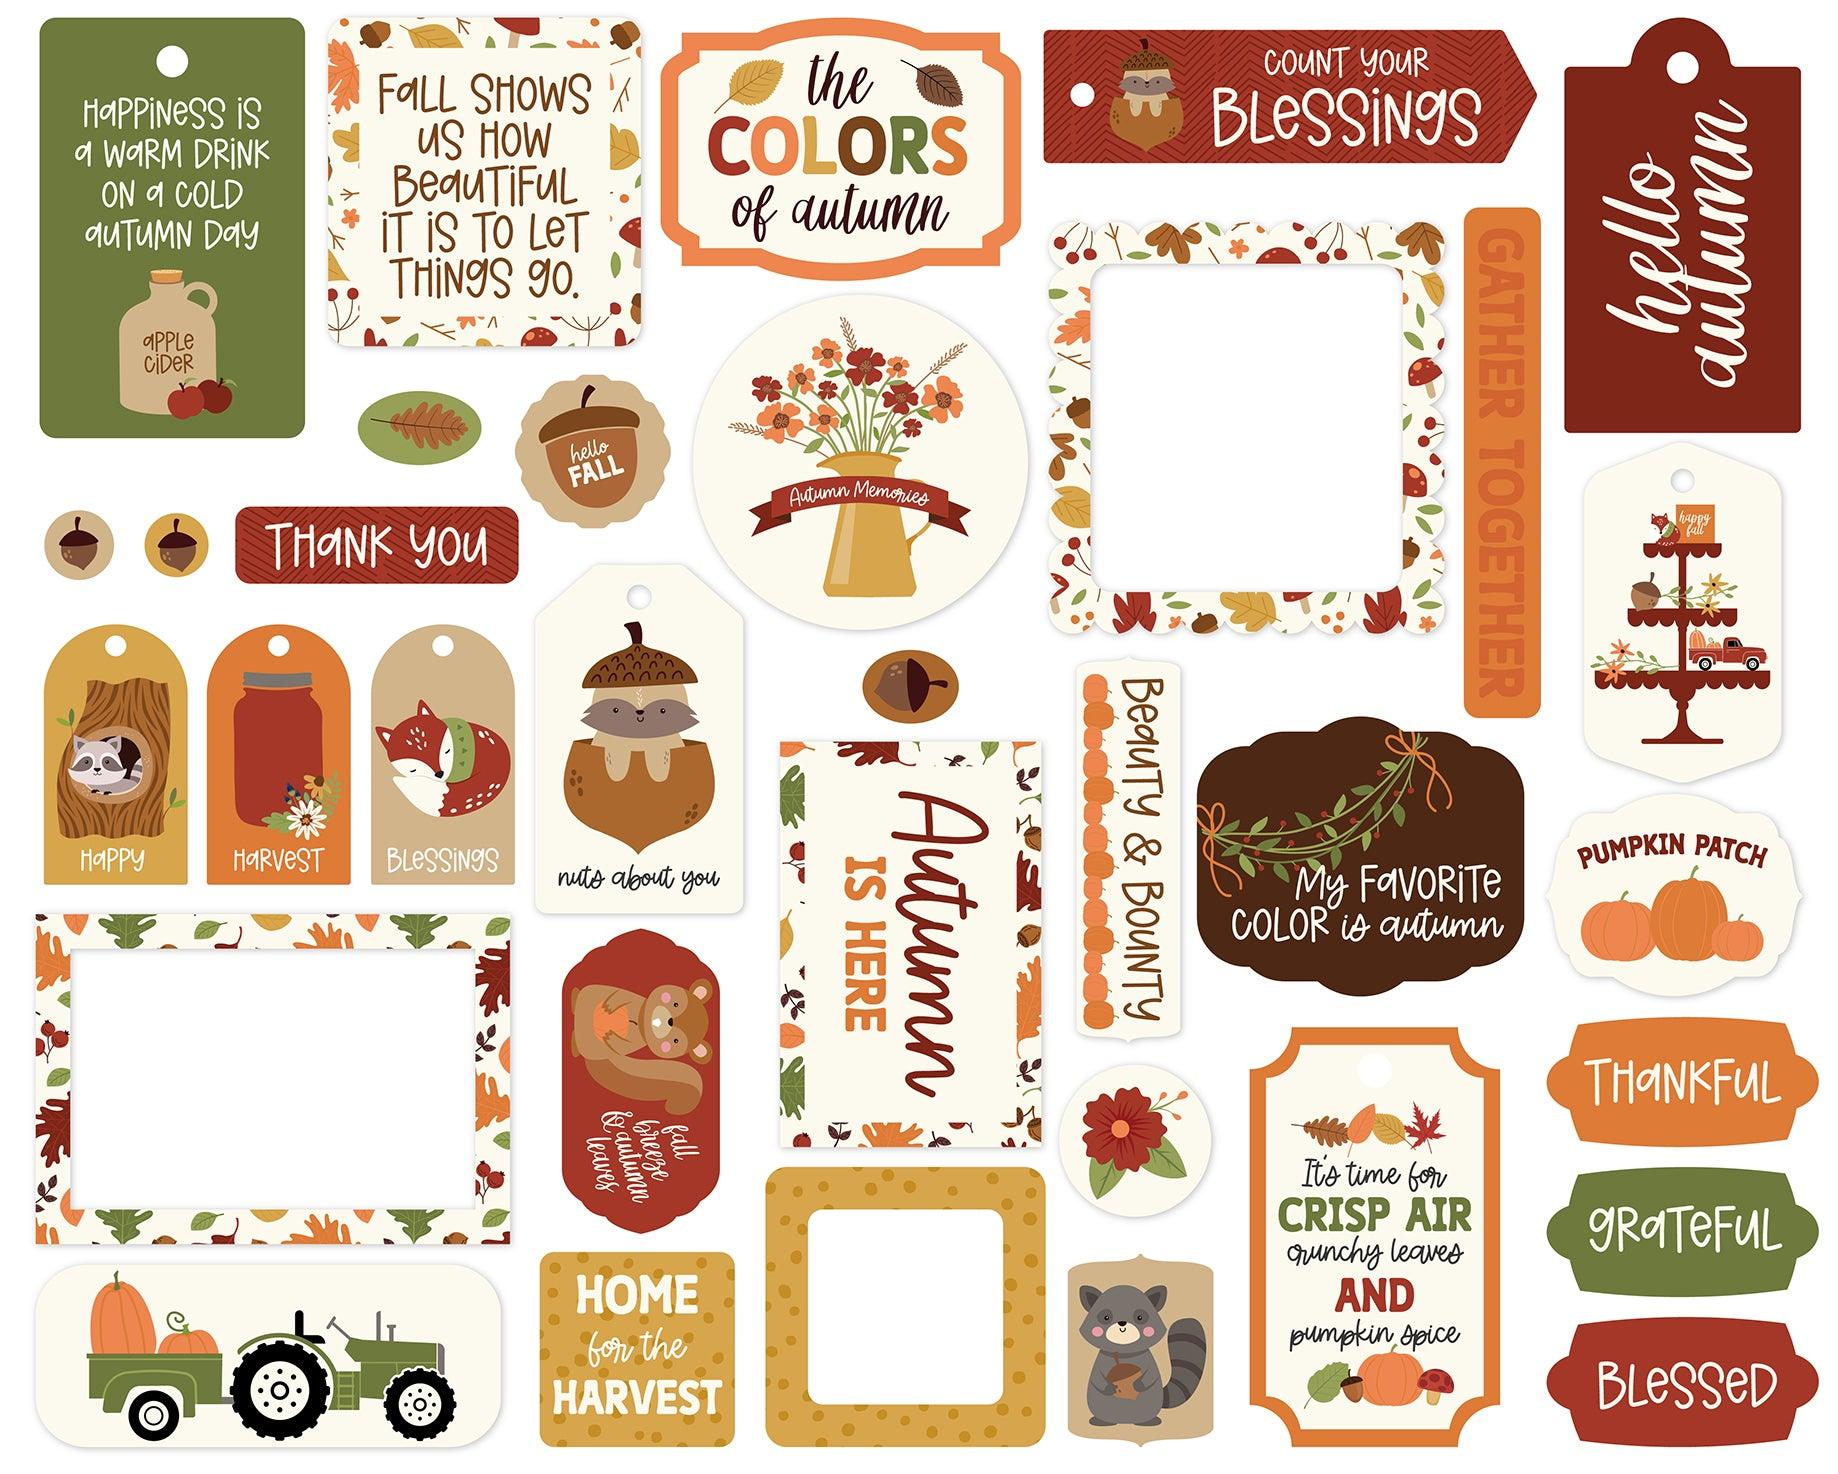 I Love Fall Collection Scrapbook Tags by Echo Park Paper - Scrapbook Supply Companies